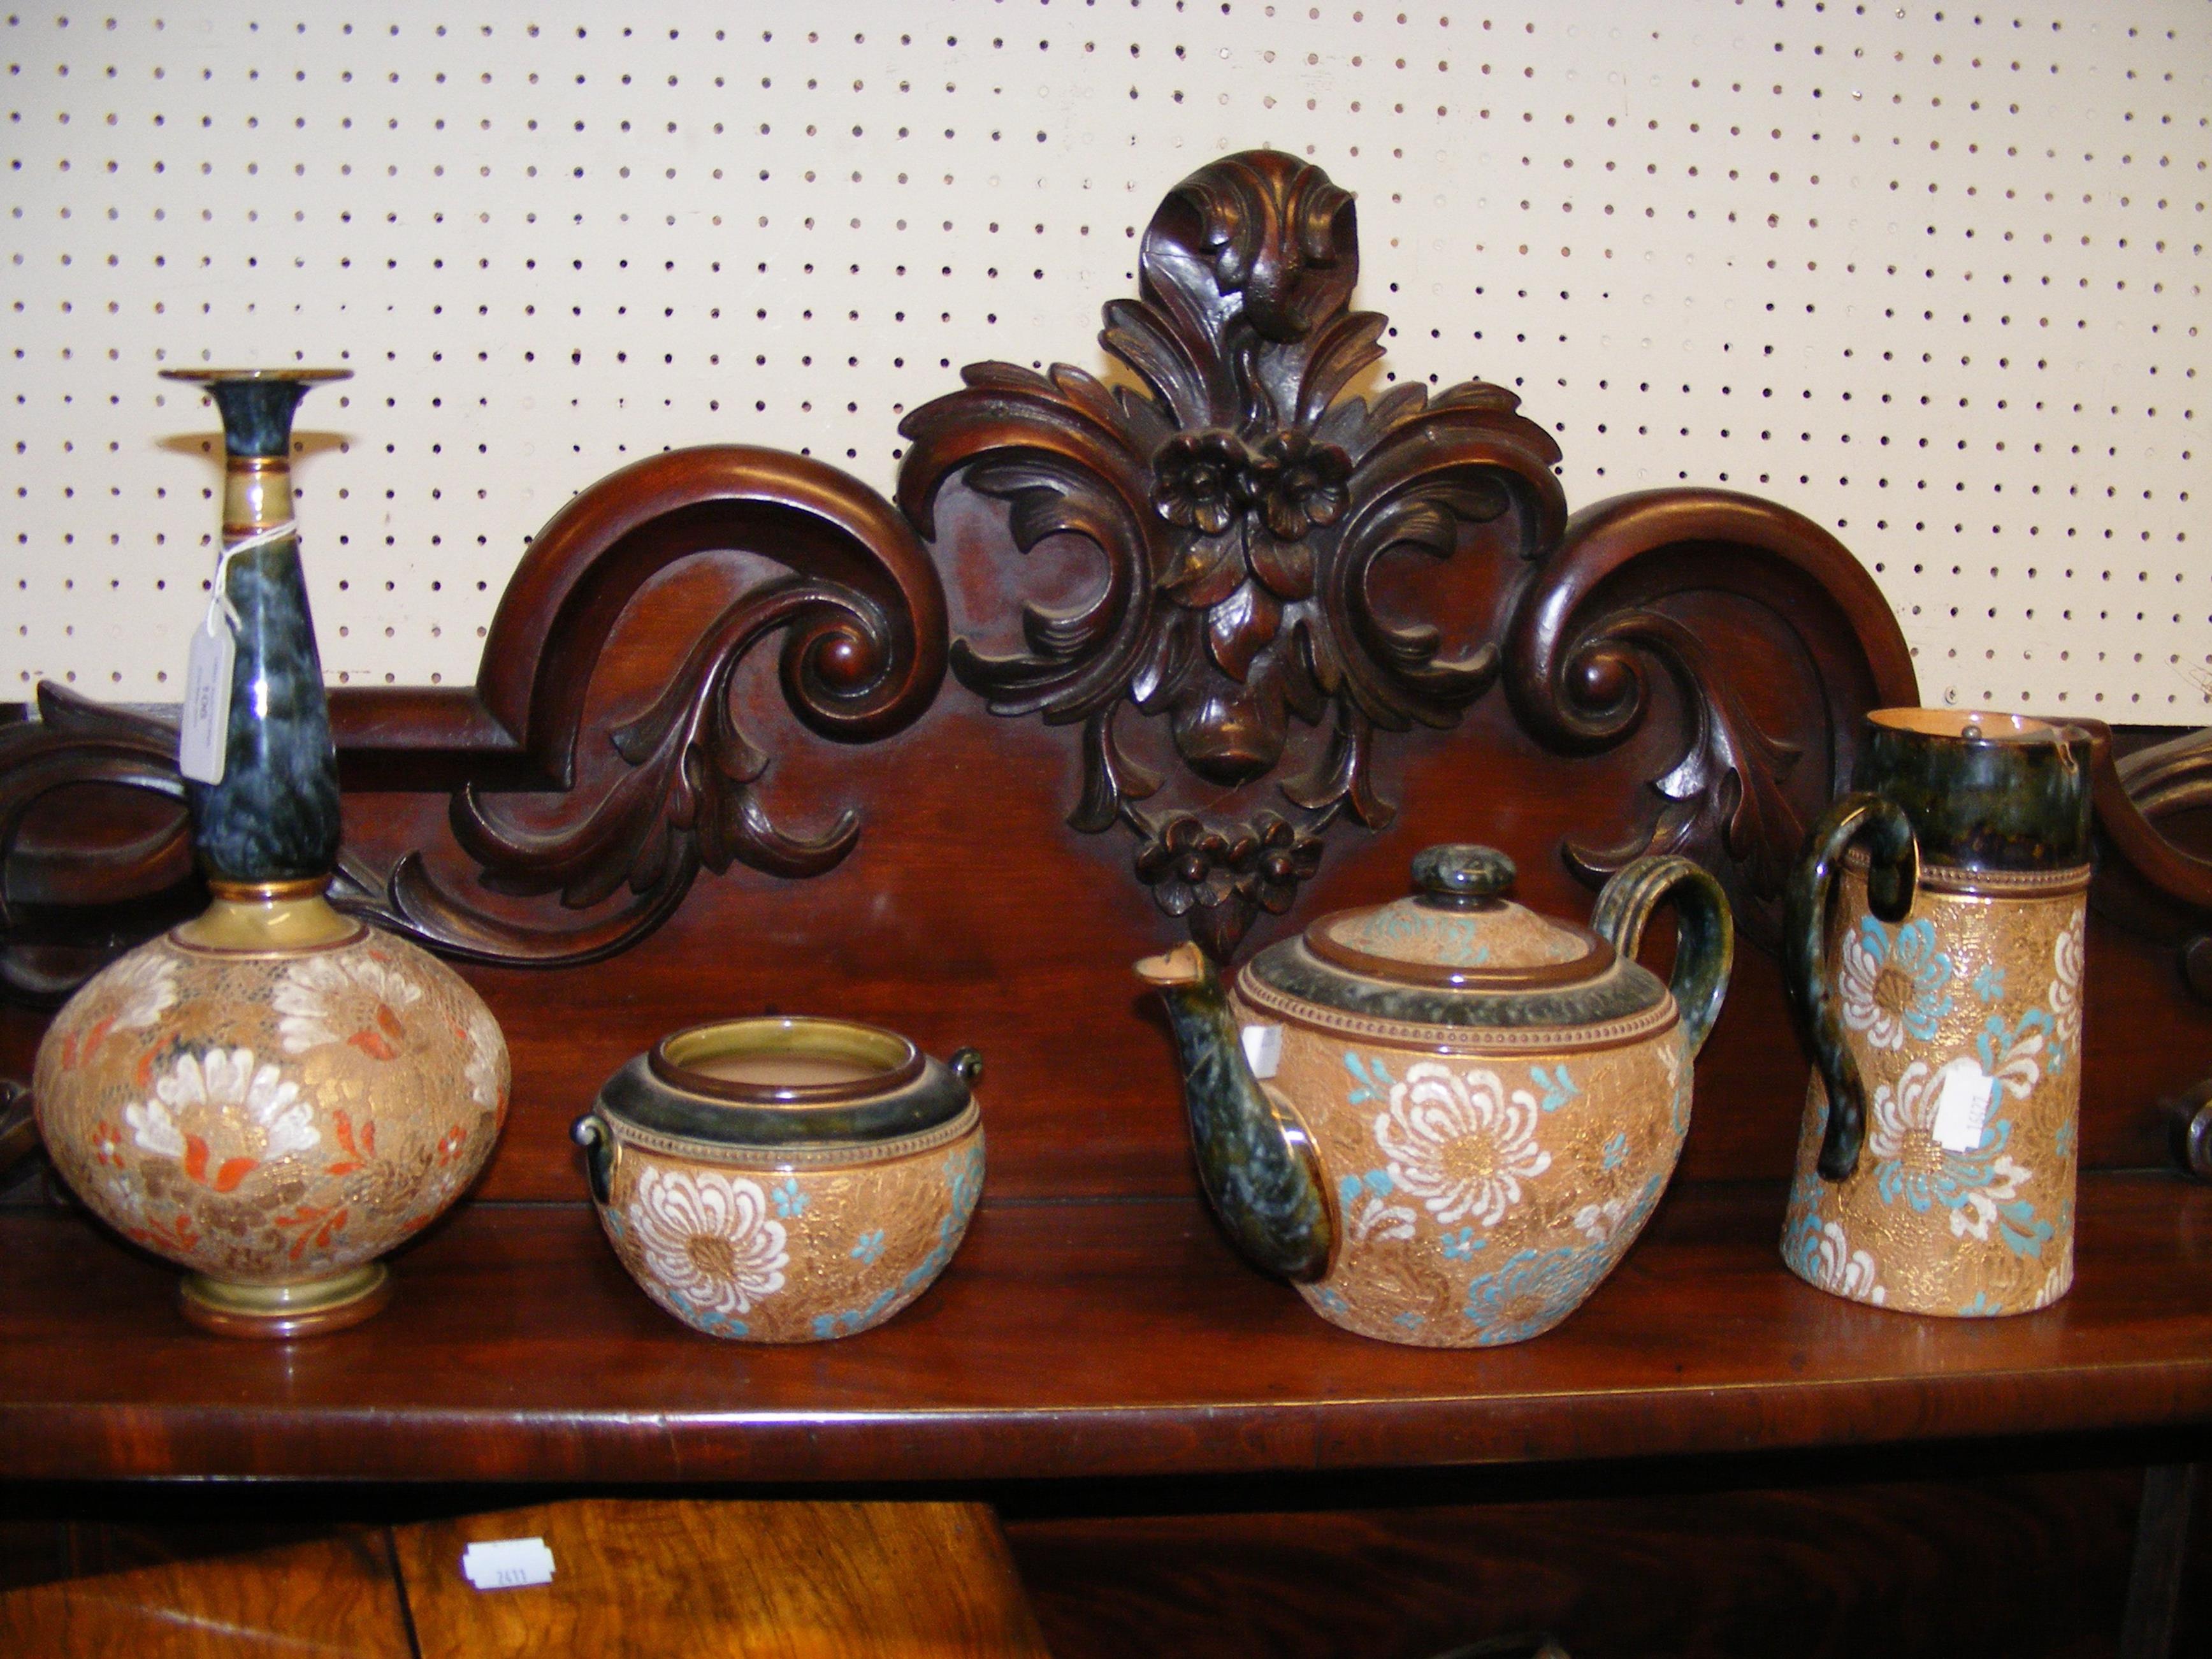 Four pieces of Doulton Slaters ware